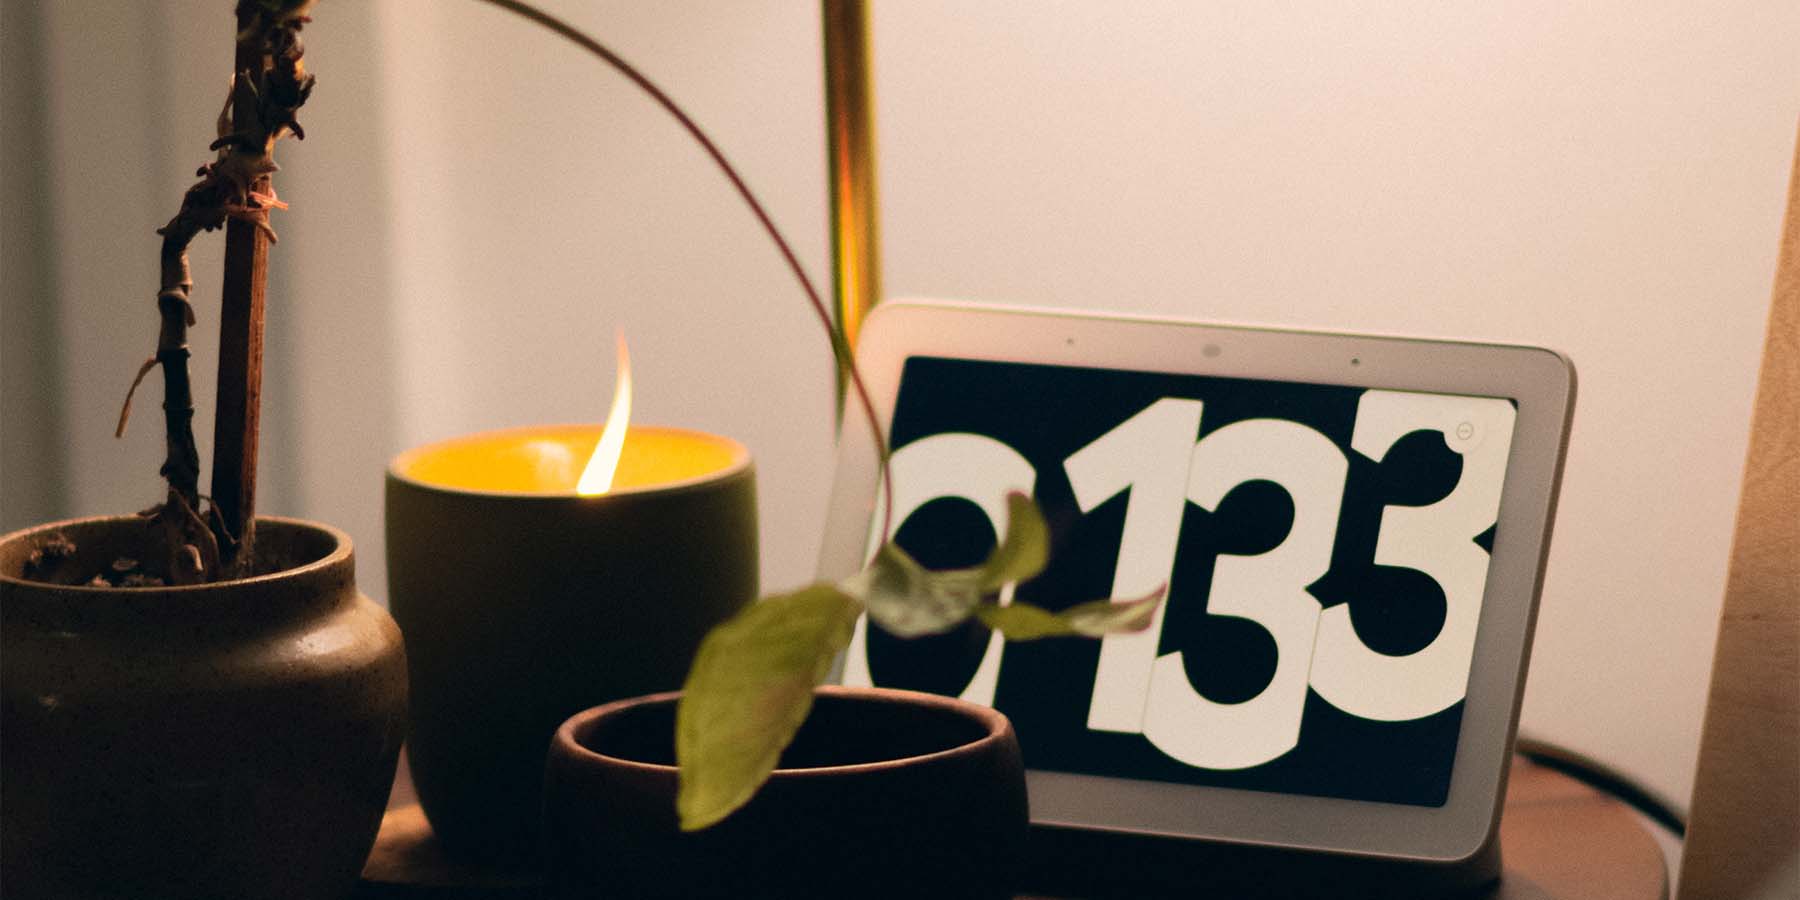 Side table with a plant, a digital clock, and a burning candle.